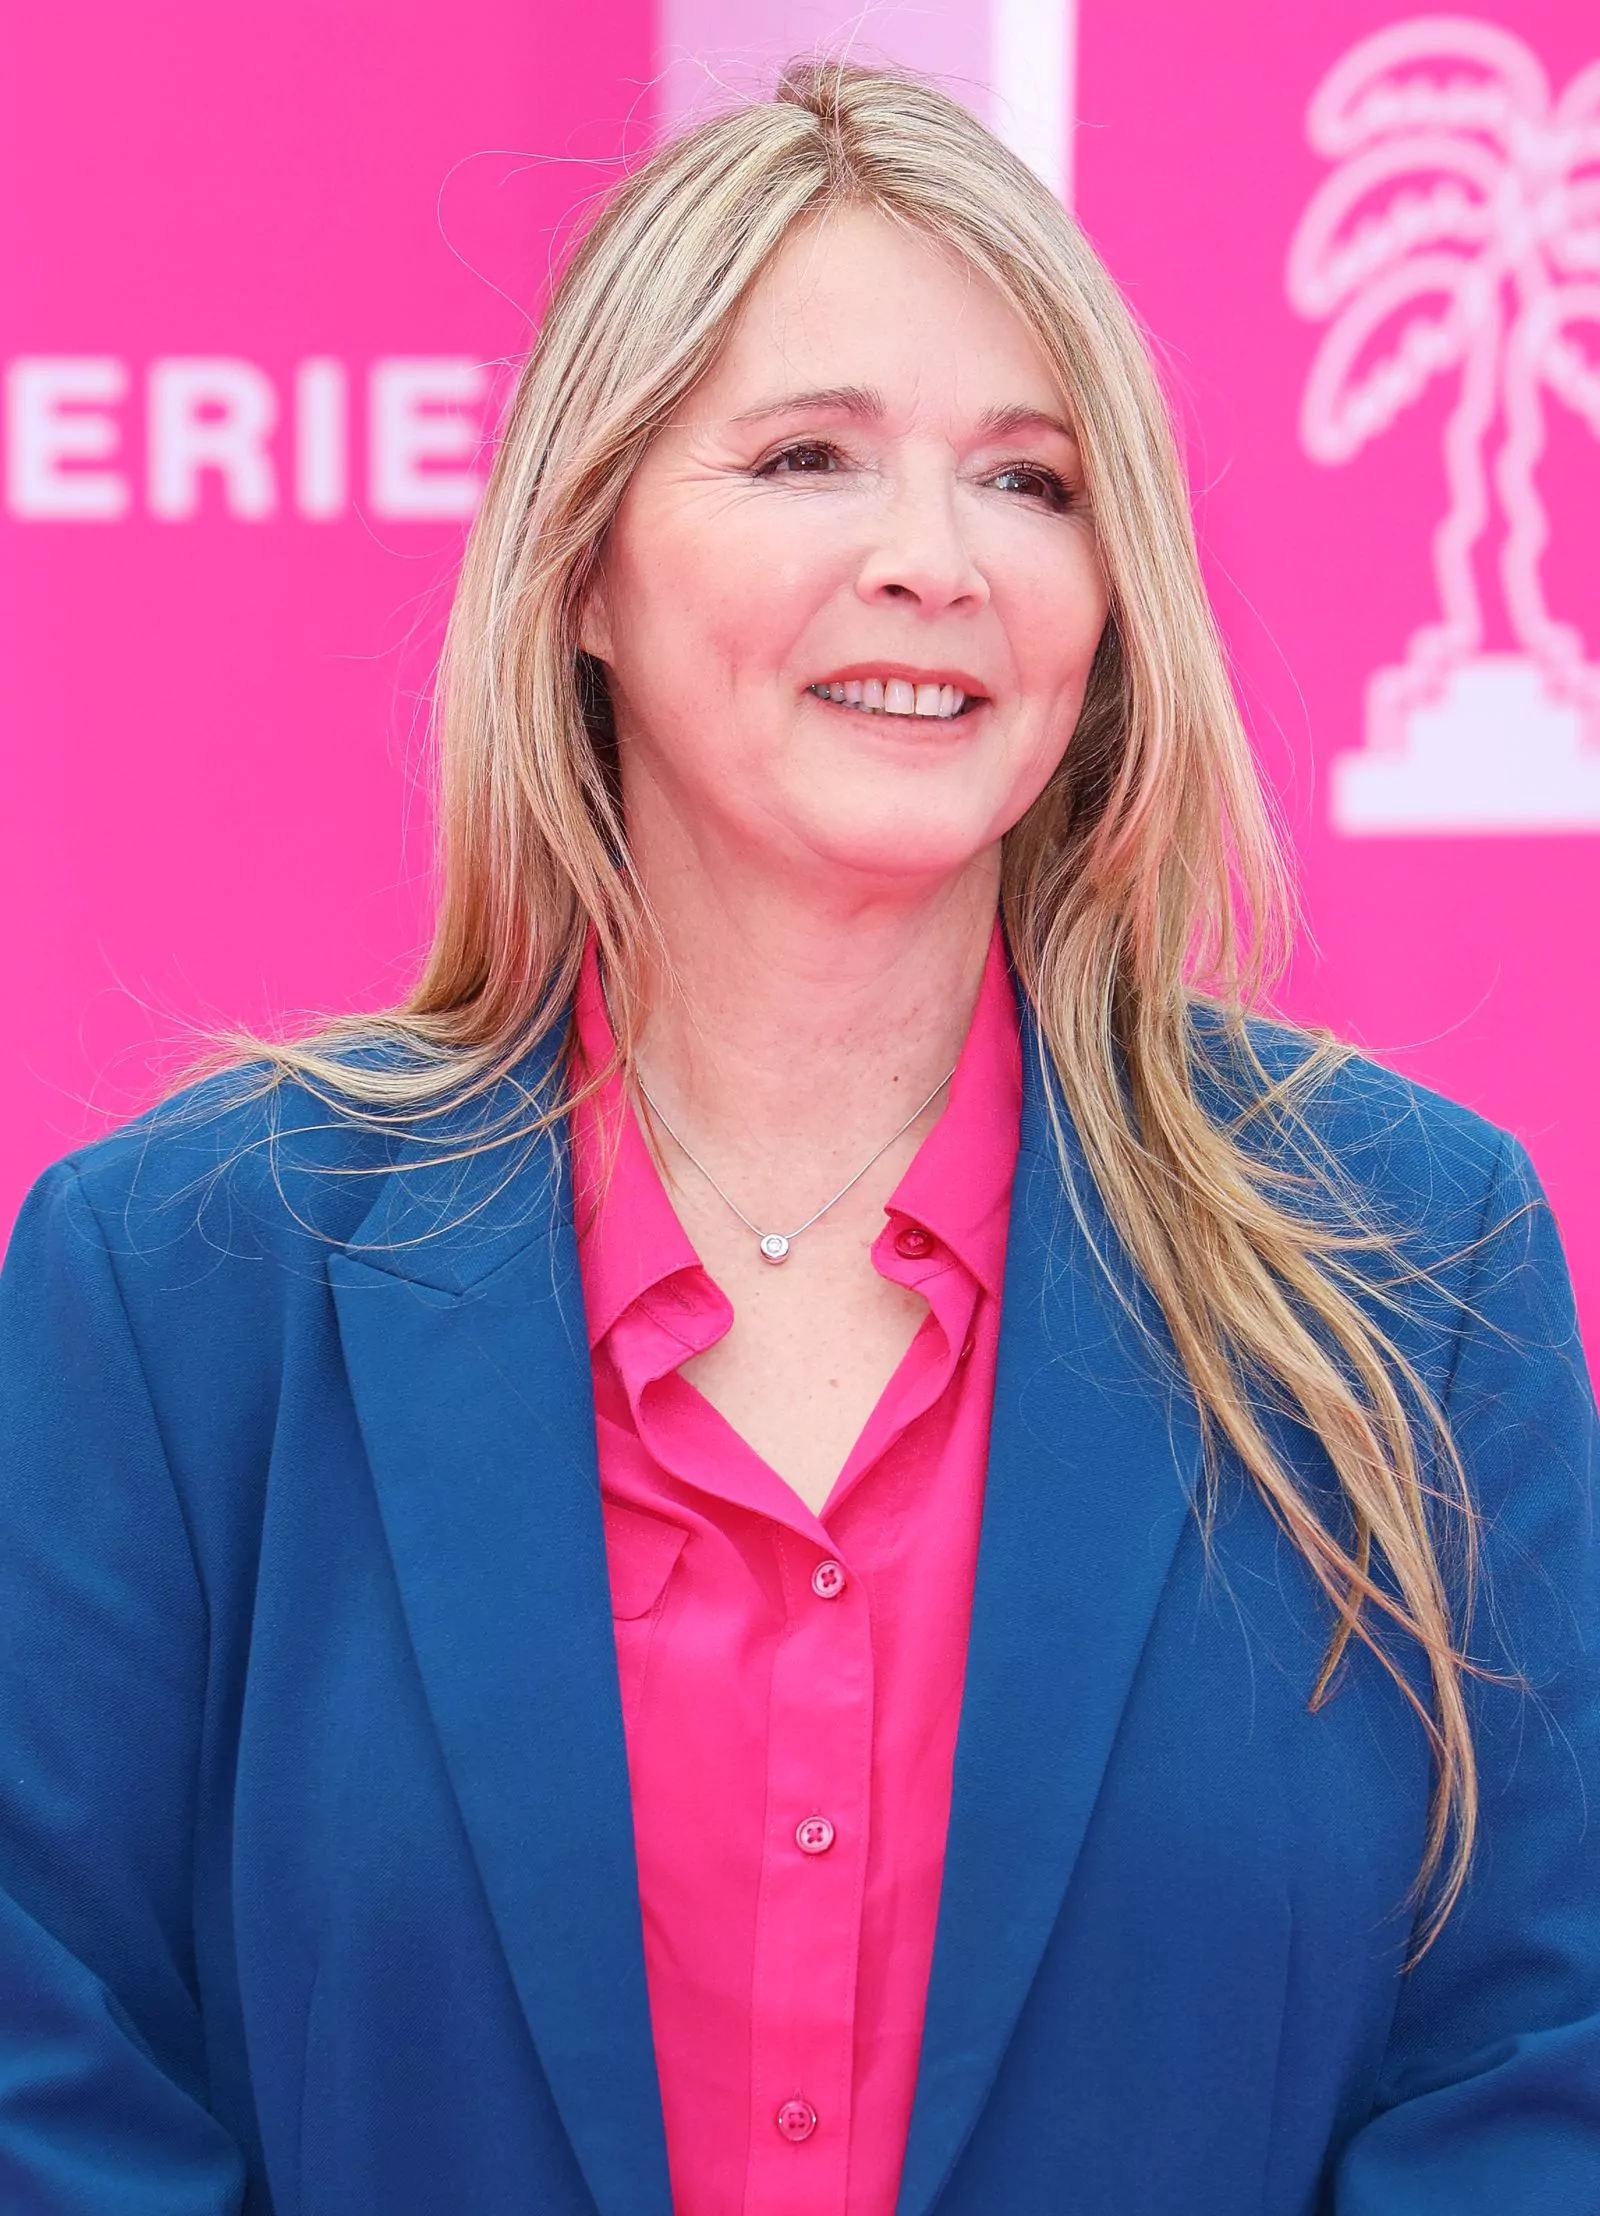 Hélène Rollet at the 6th International Festival of TV Series Canneseries 2023 in Cannes, April 14, 2023, photo 2